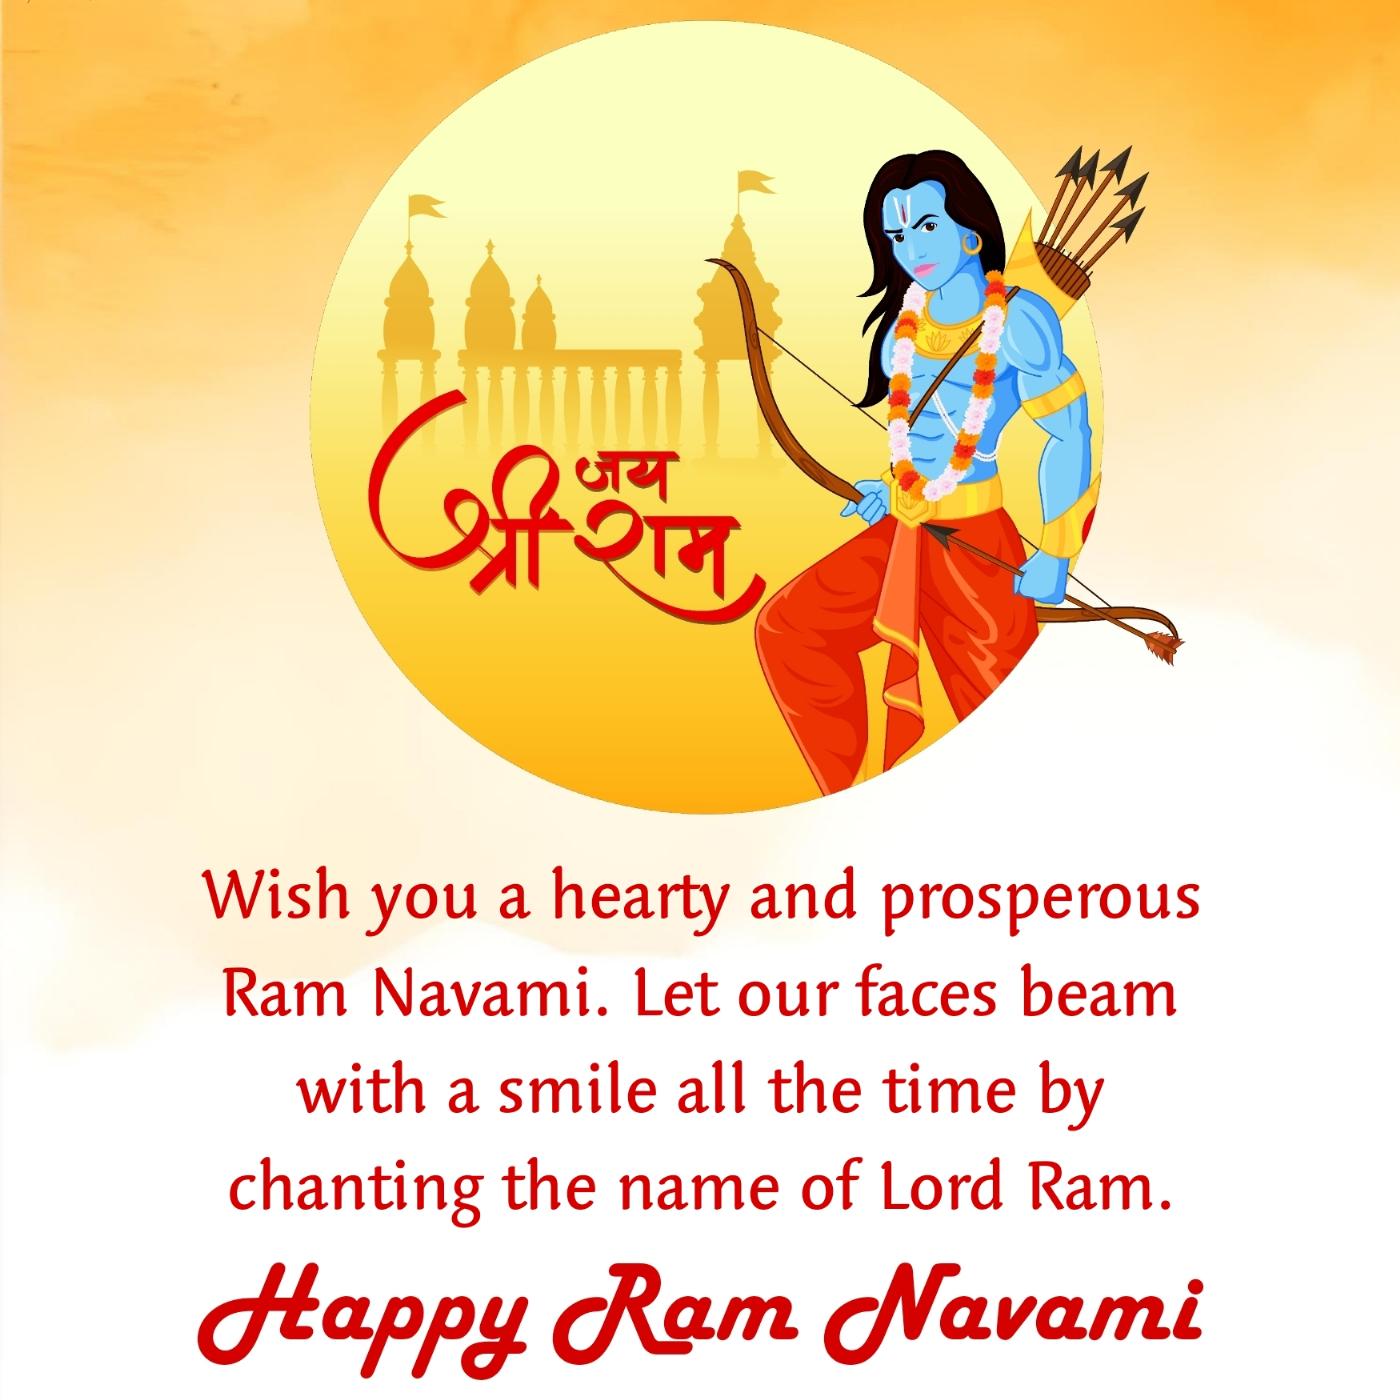 Wish you a hearty and prosperous Ram Navami